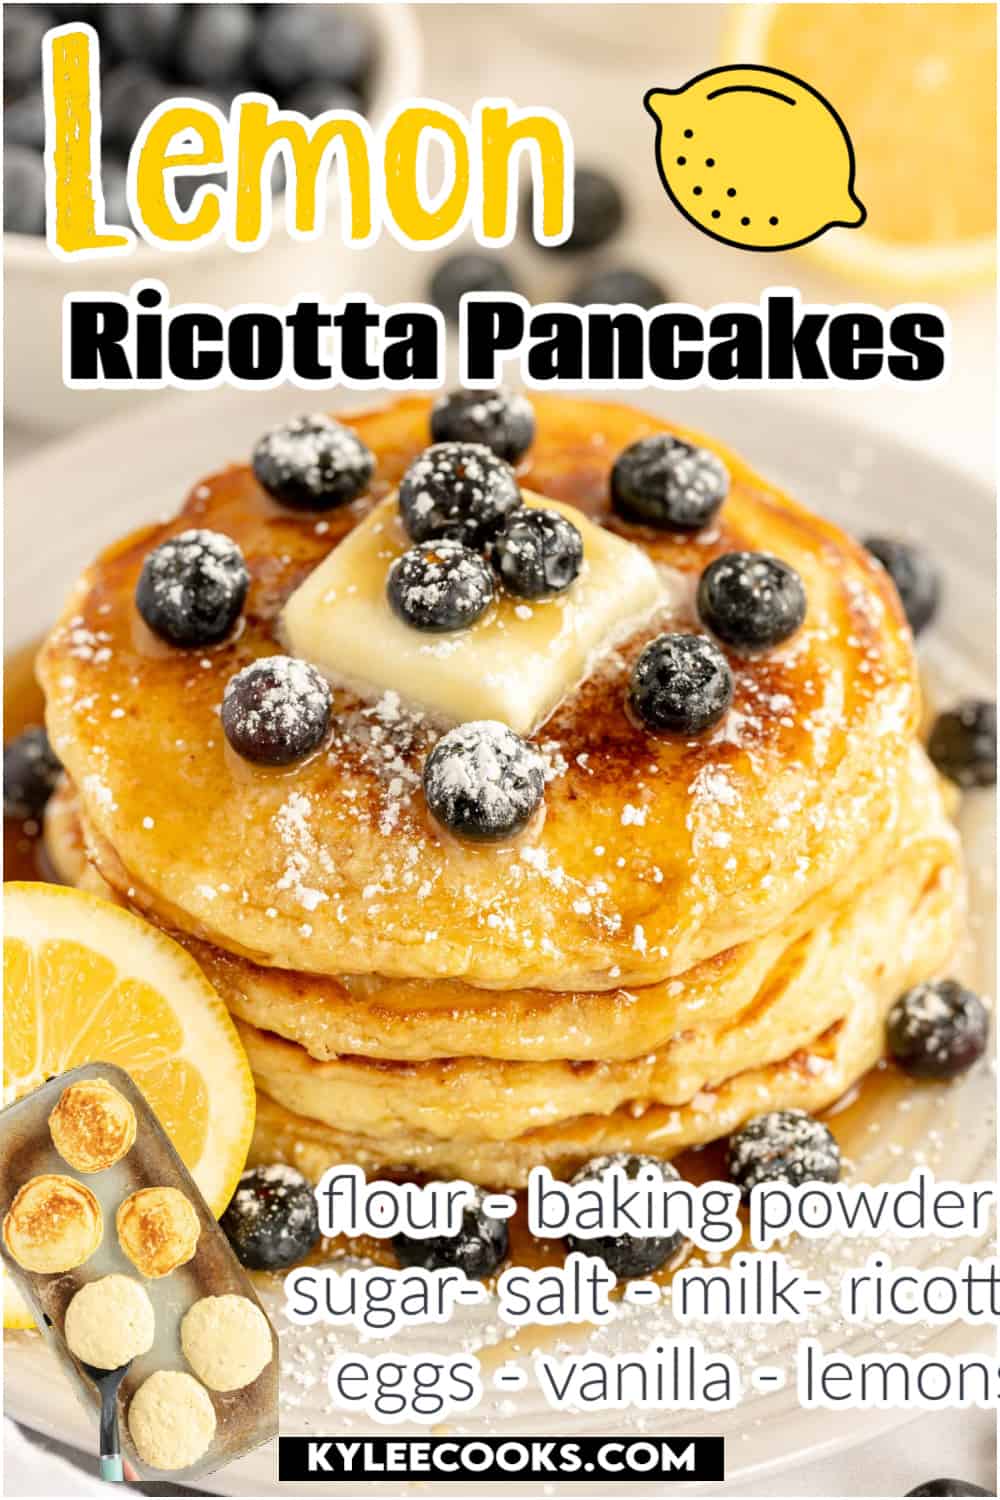 stack of pancakes with a cut lemon and blueberries with recipe name and ingredients overlaid in text.